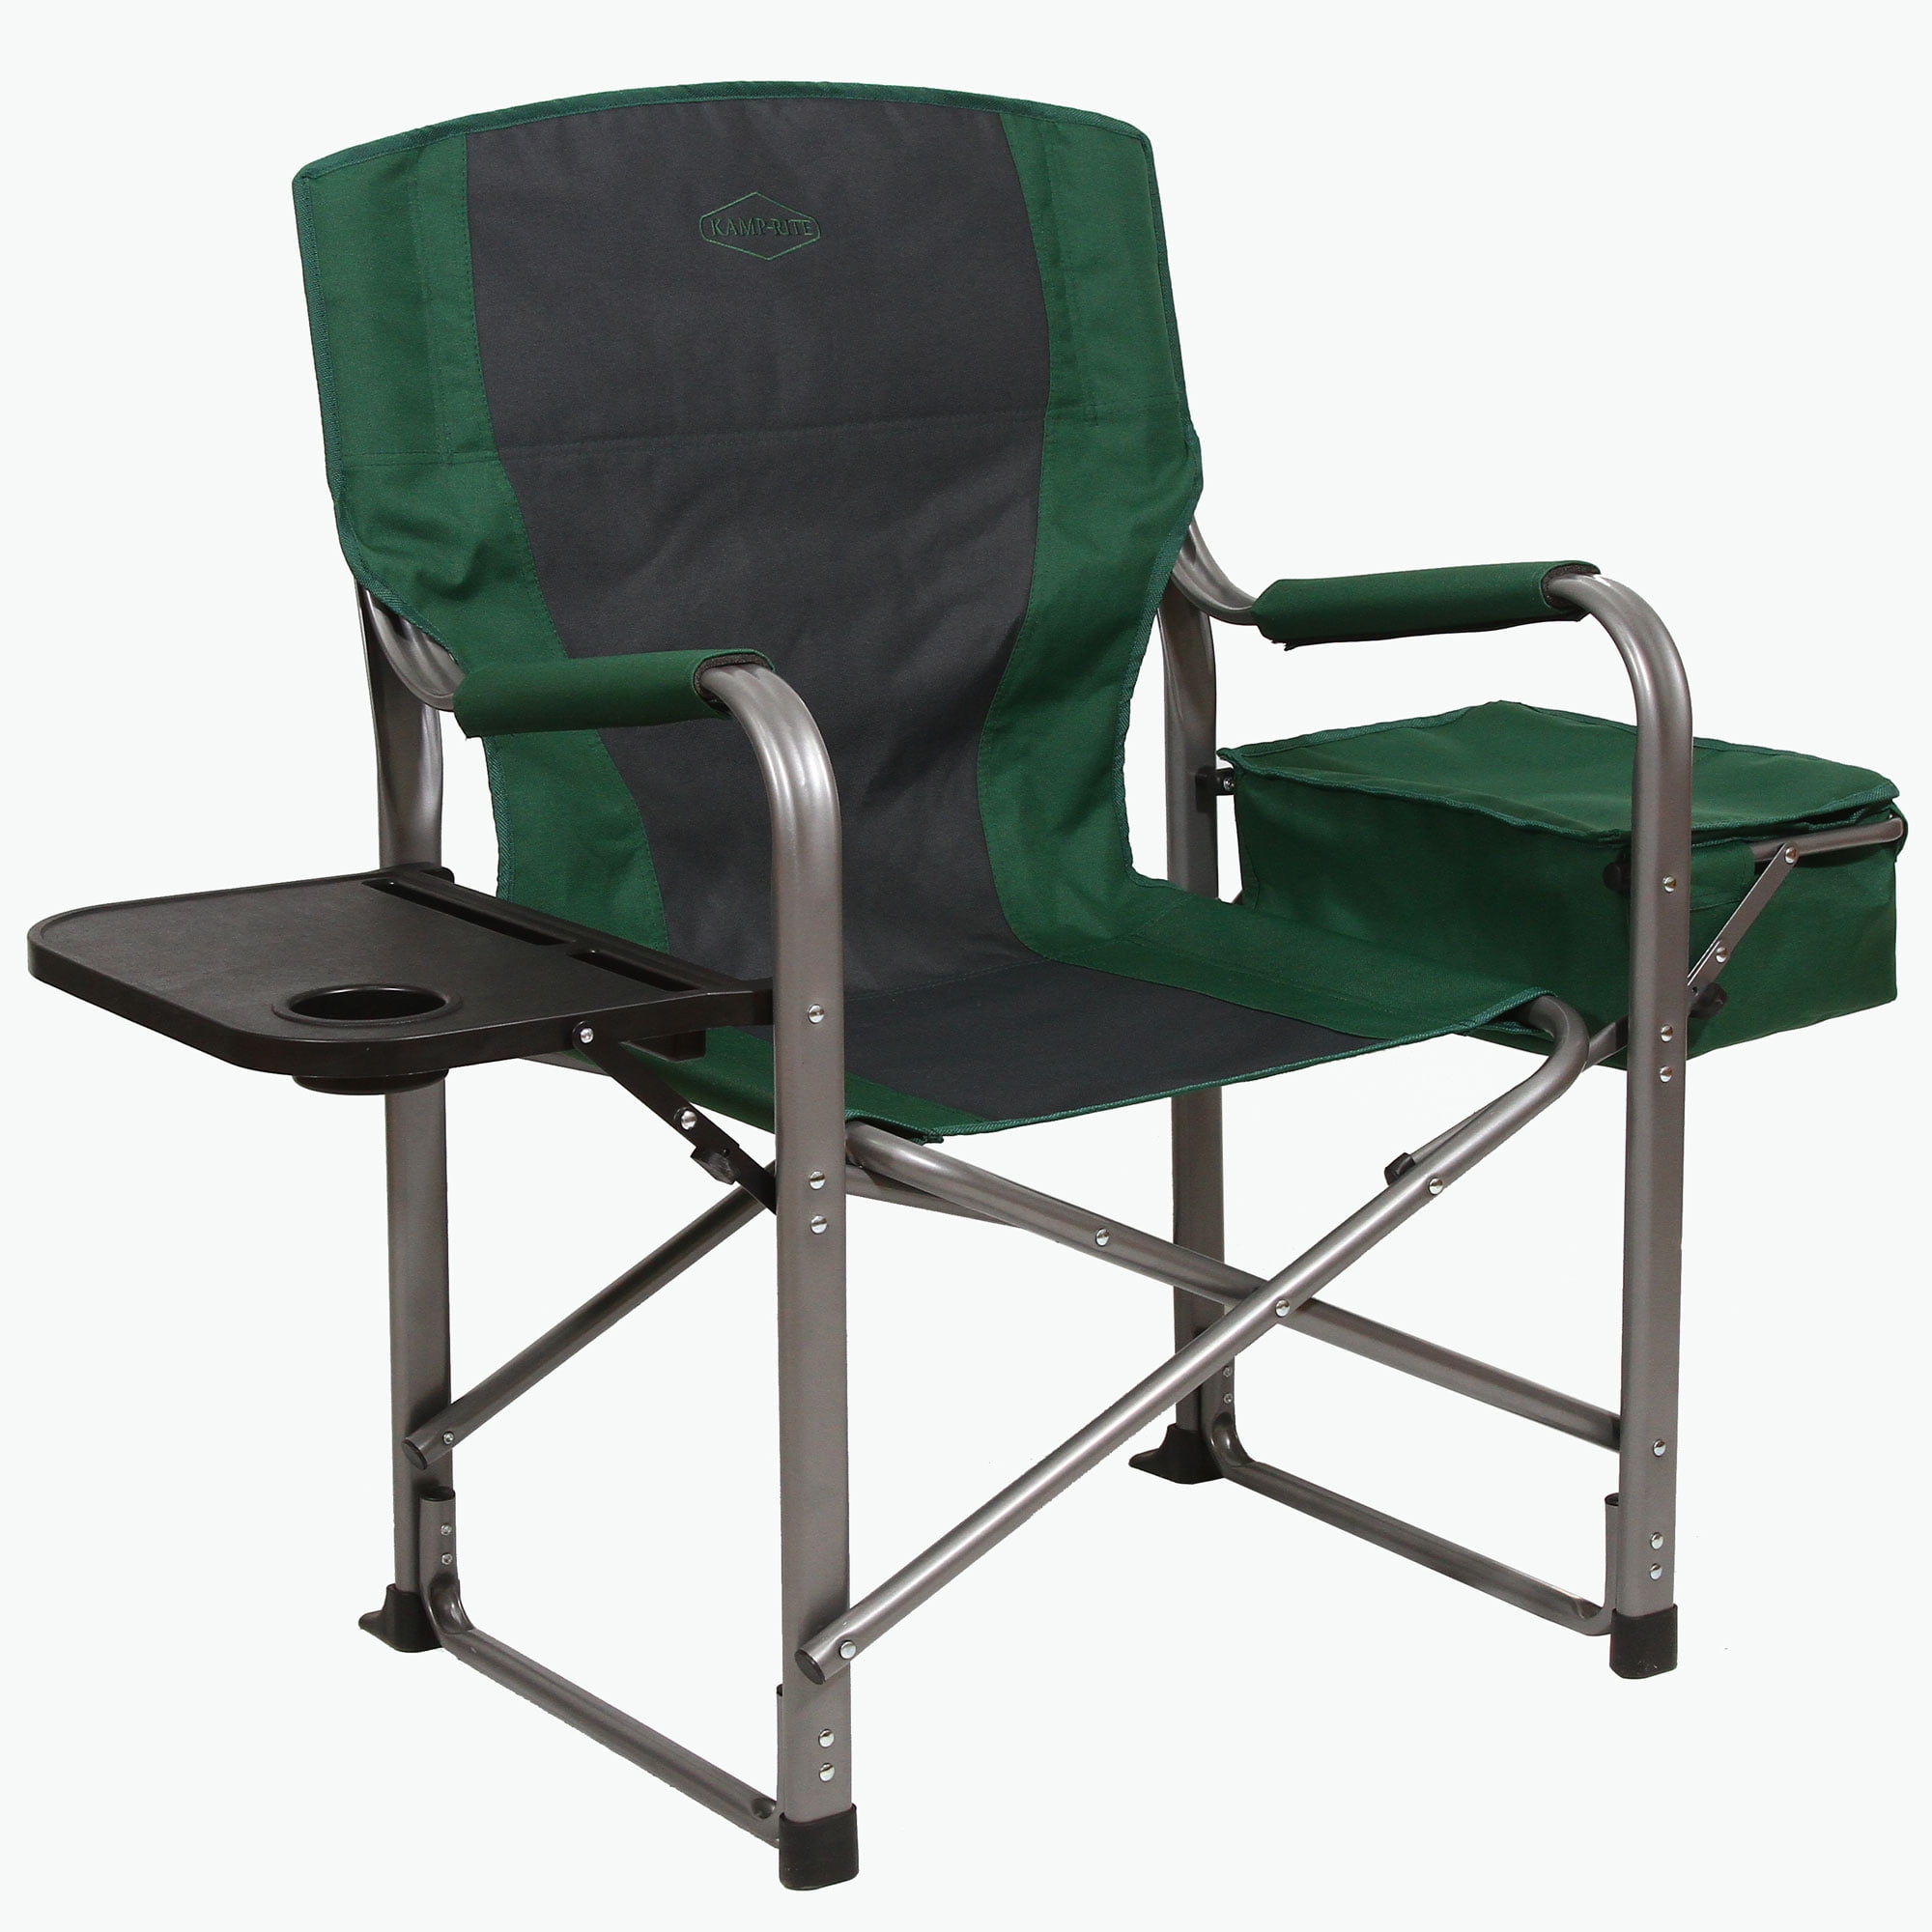 Kamp-Rite Director's Chair Outdoor Camping Folding Chair w/ Side Table